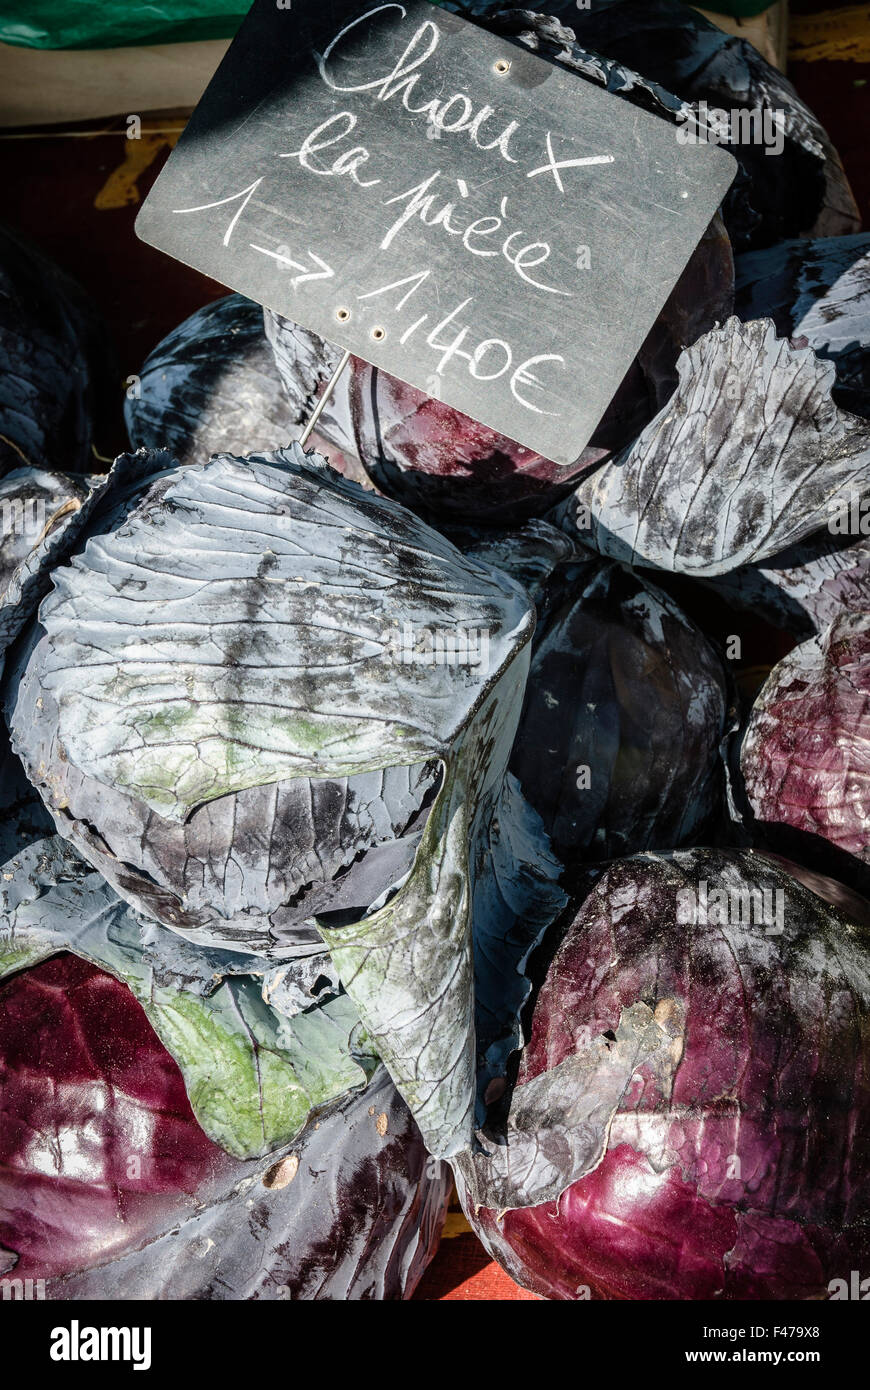 RED CABBAGE Stock Photo